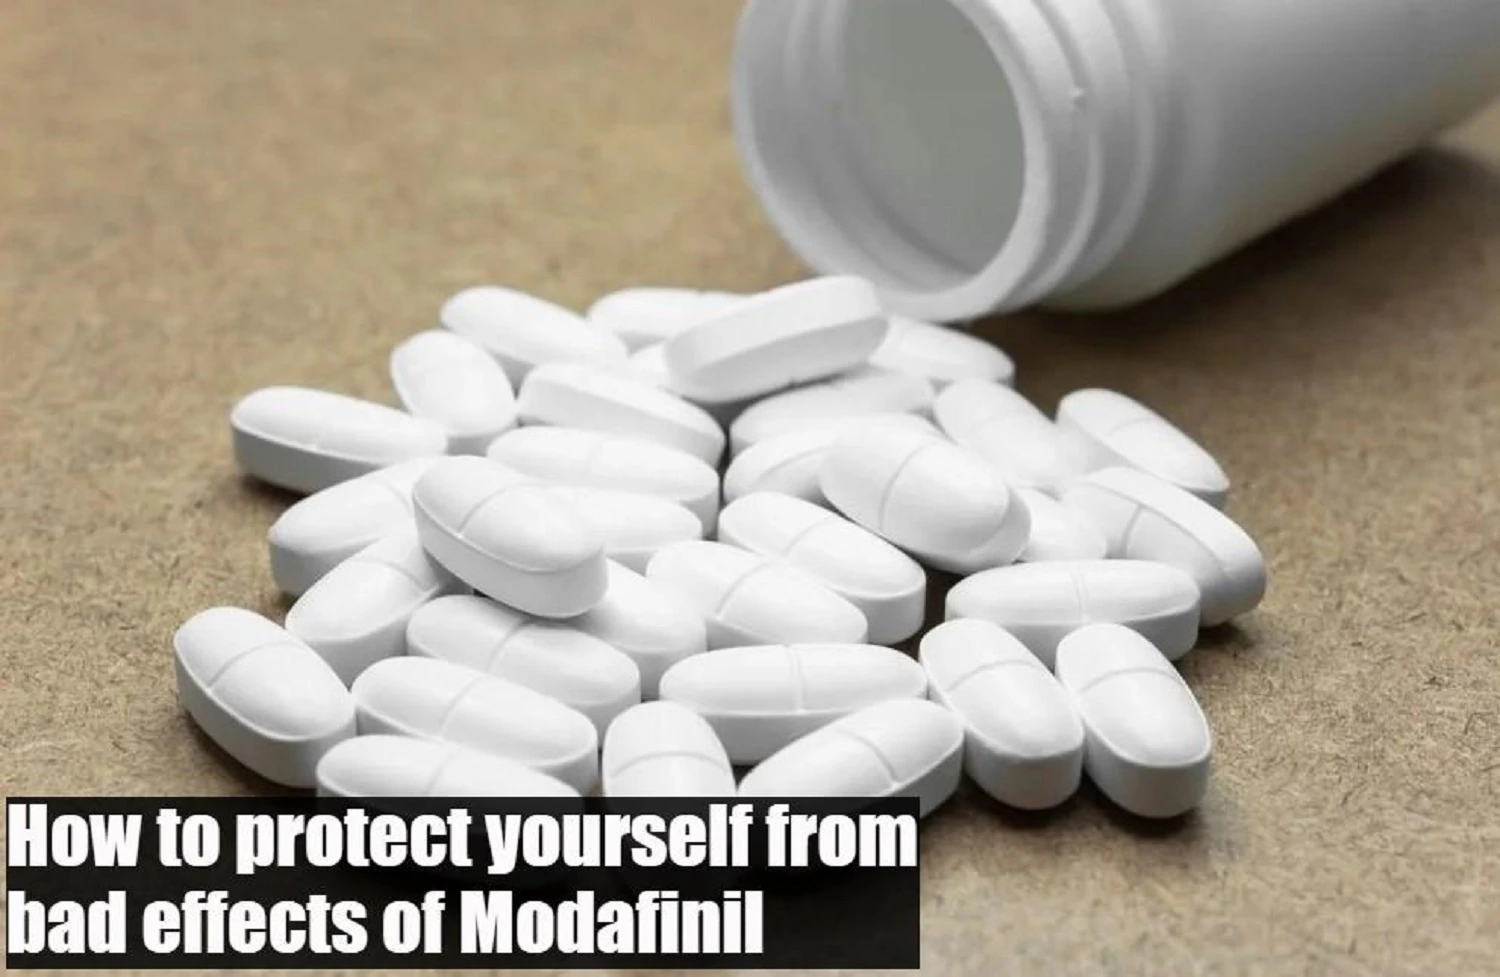 Protect yourself from Modafinil bad effects